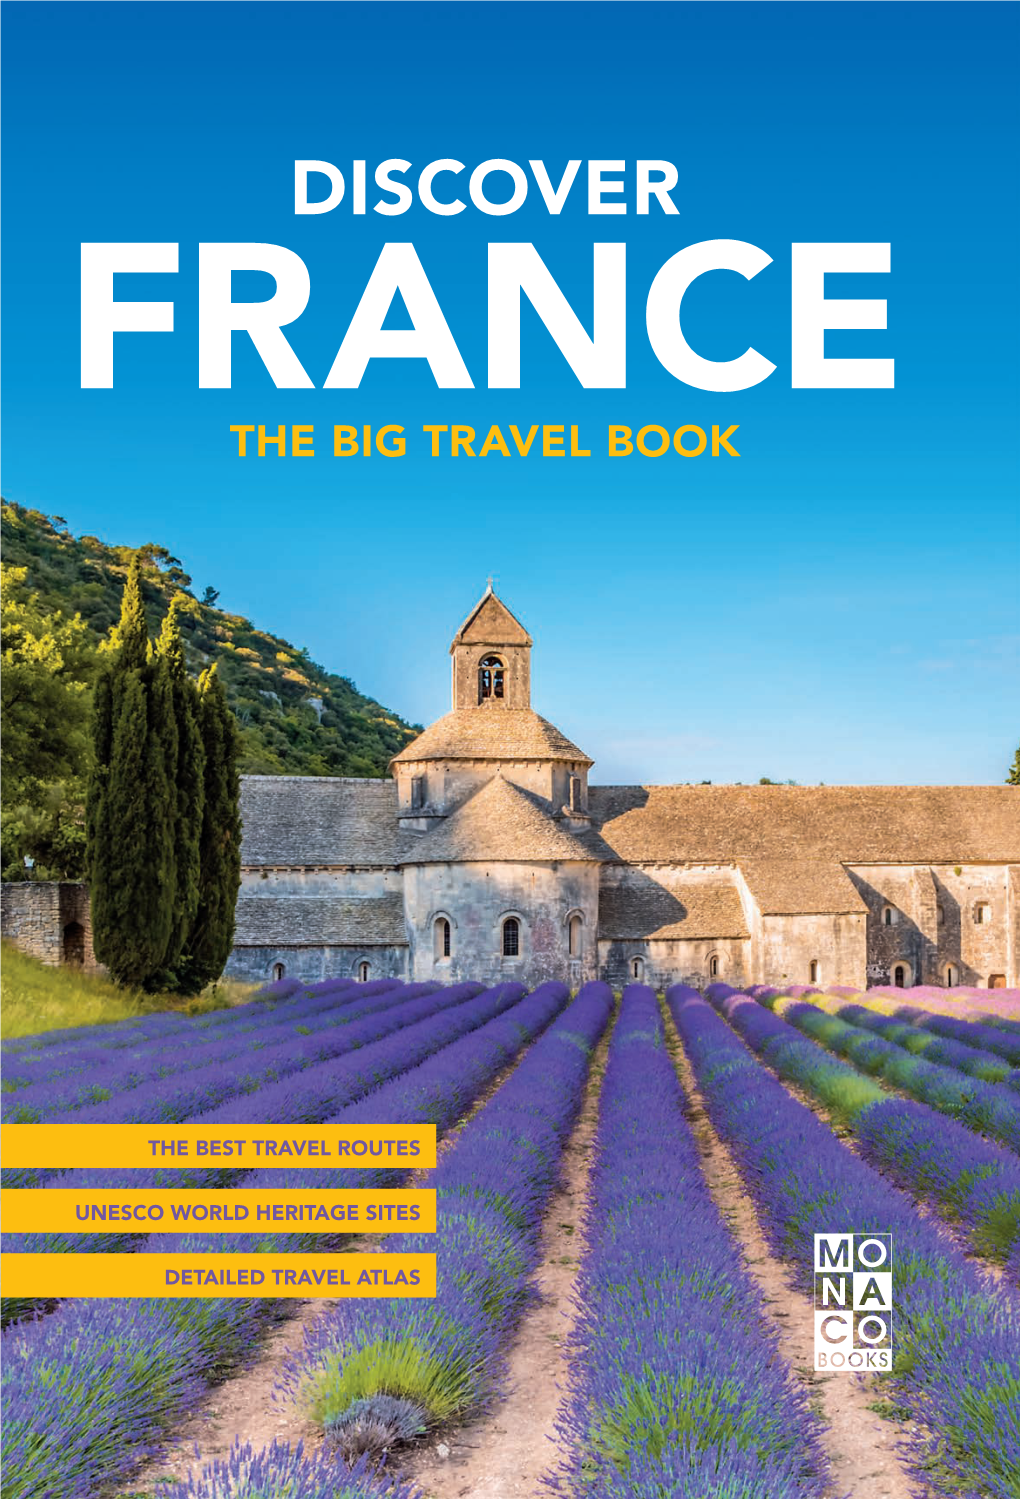 The Best Travel Routes Unesco World Heritage Sites Detailed Travel Atlas